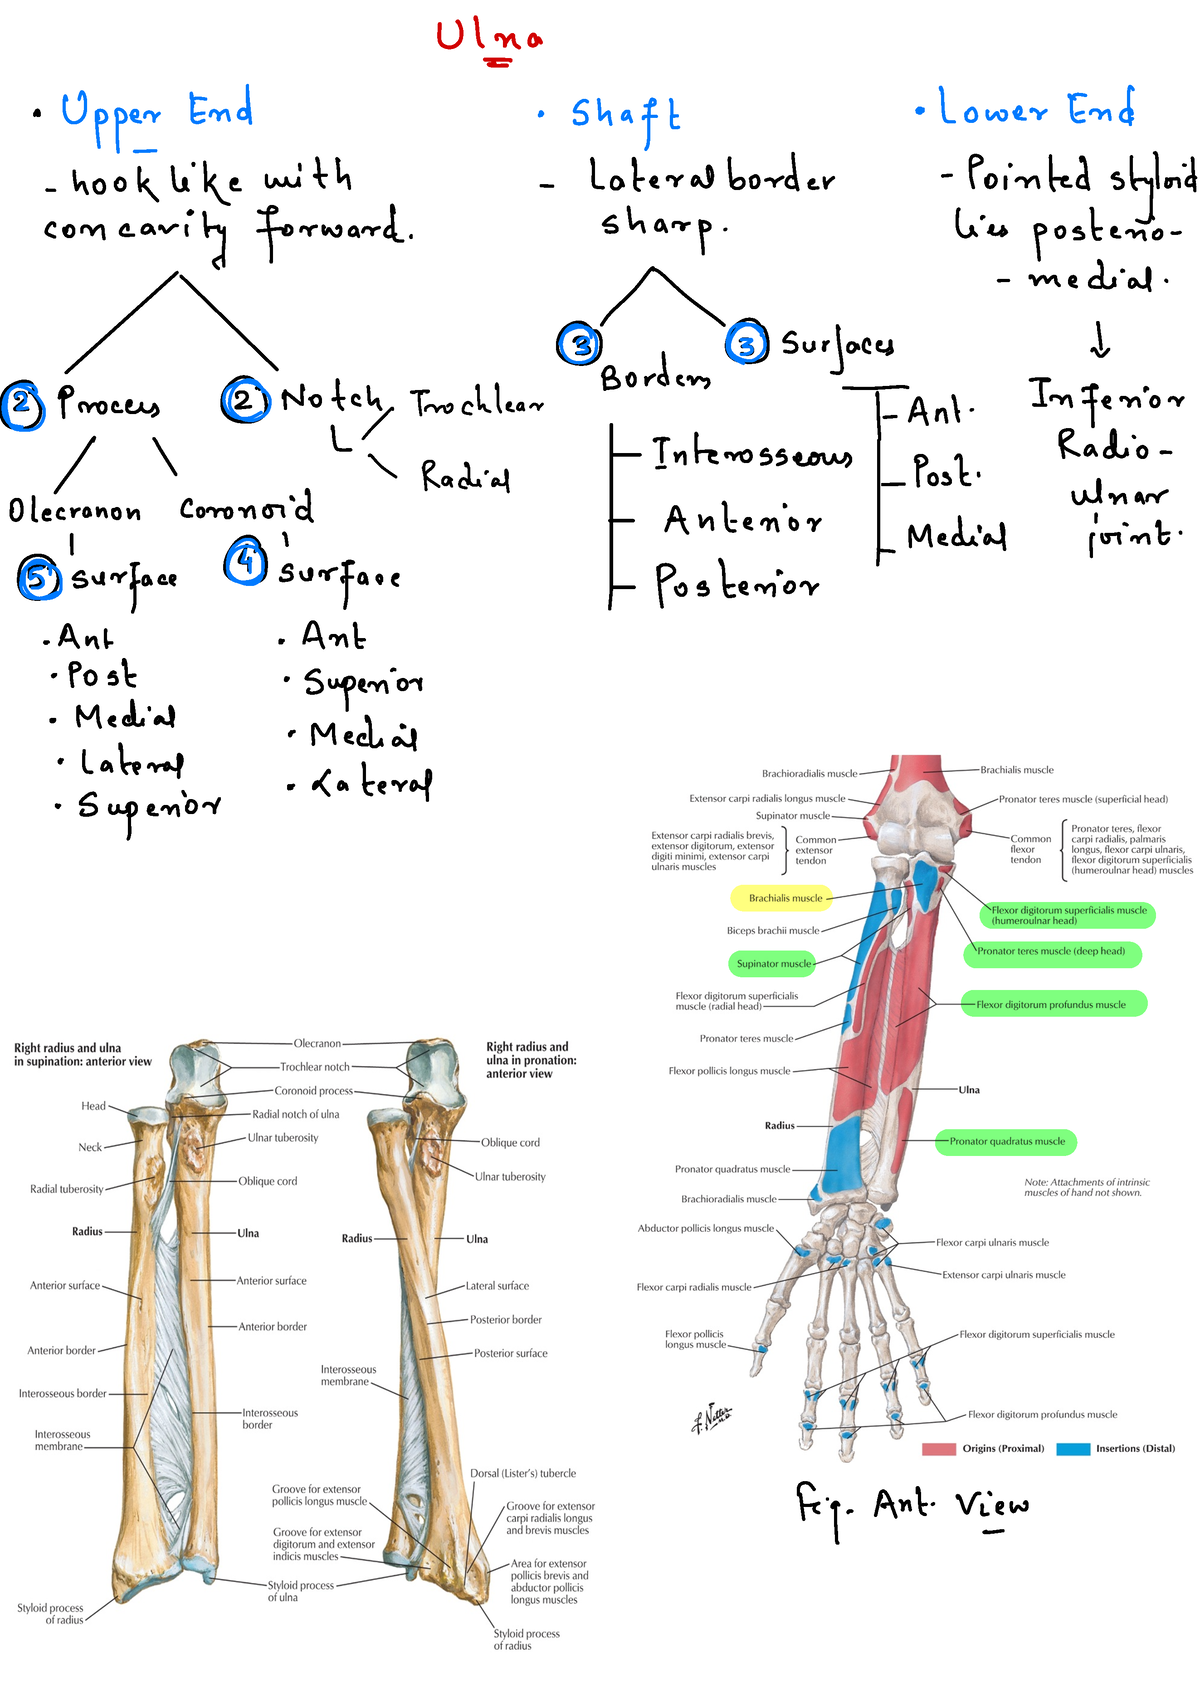 Ulna Bone And Attachments Flow Chart Ulna Upper End Shaft Lower End Hook Like With 8596